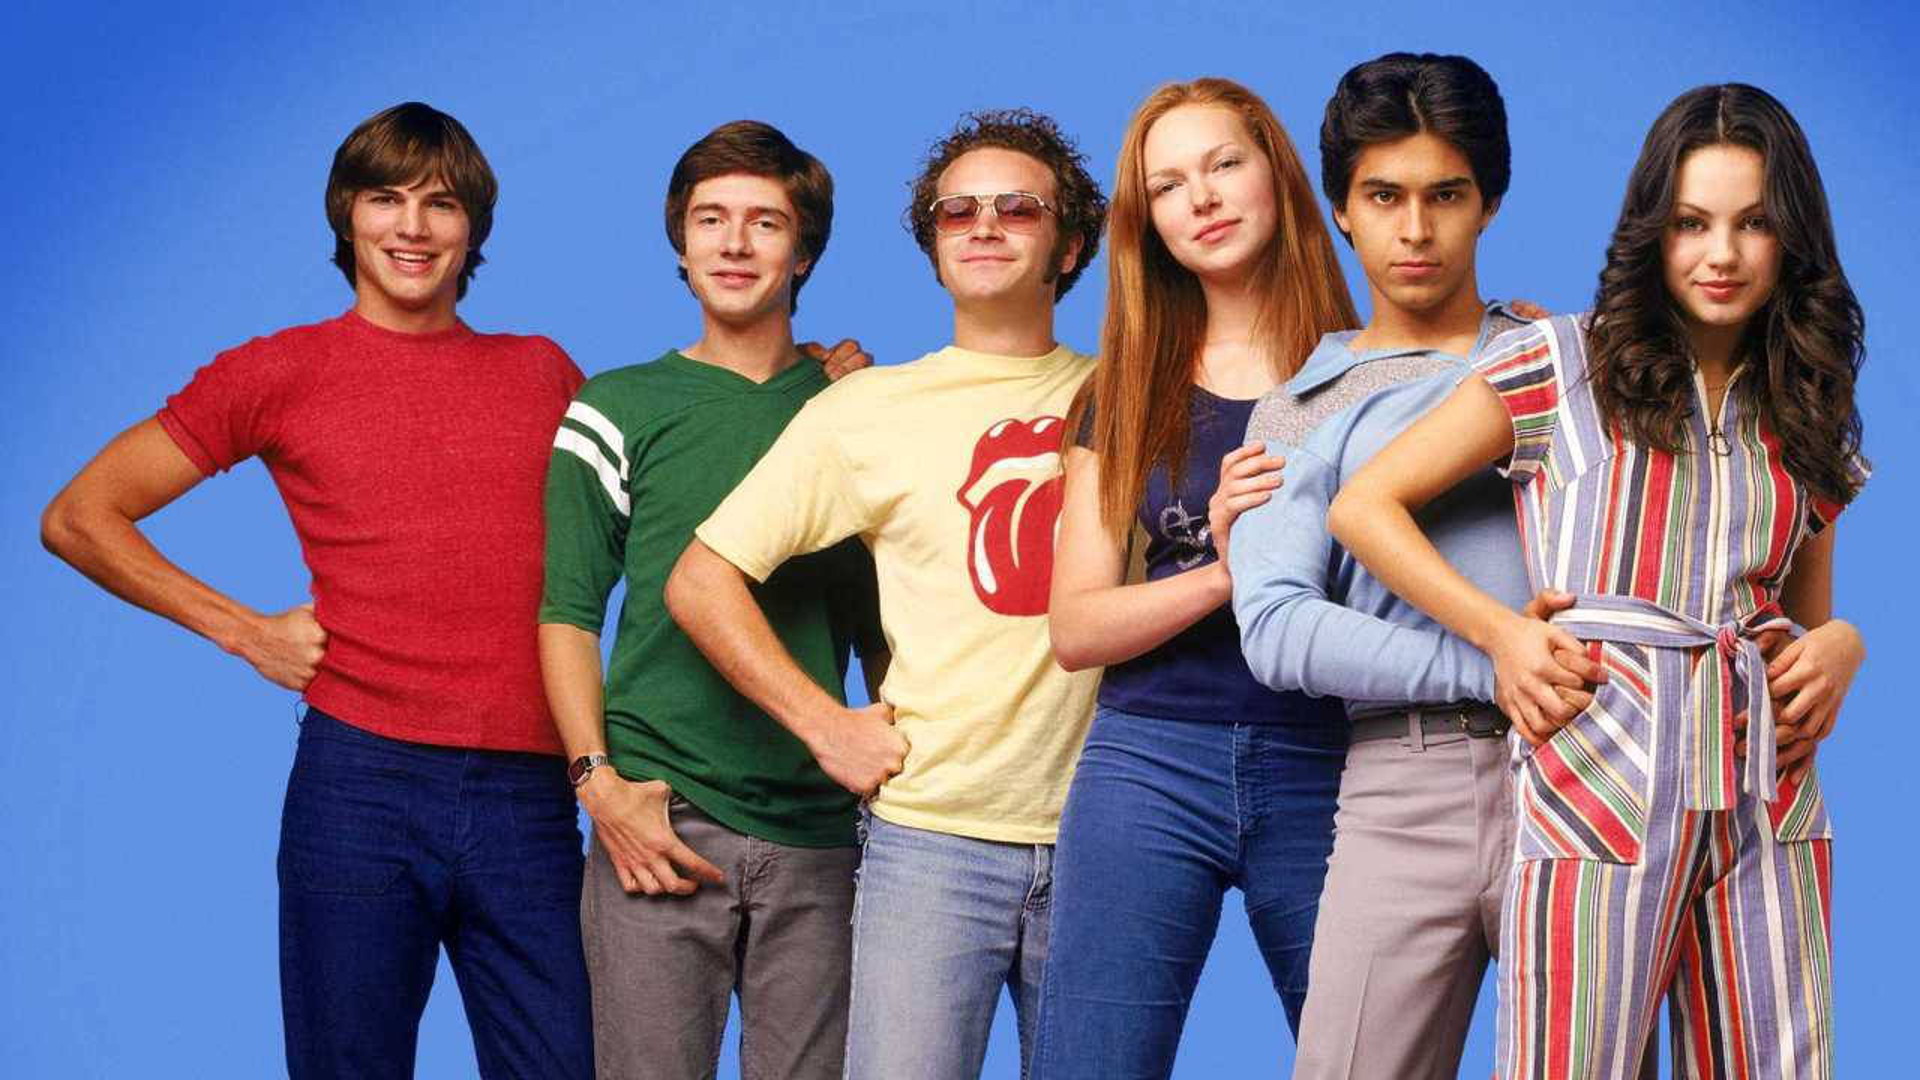 That 70’s Show: The Complete Series On Blu-ray Only $37.99!